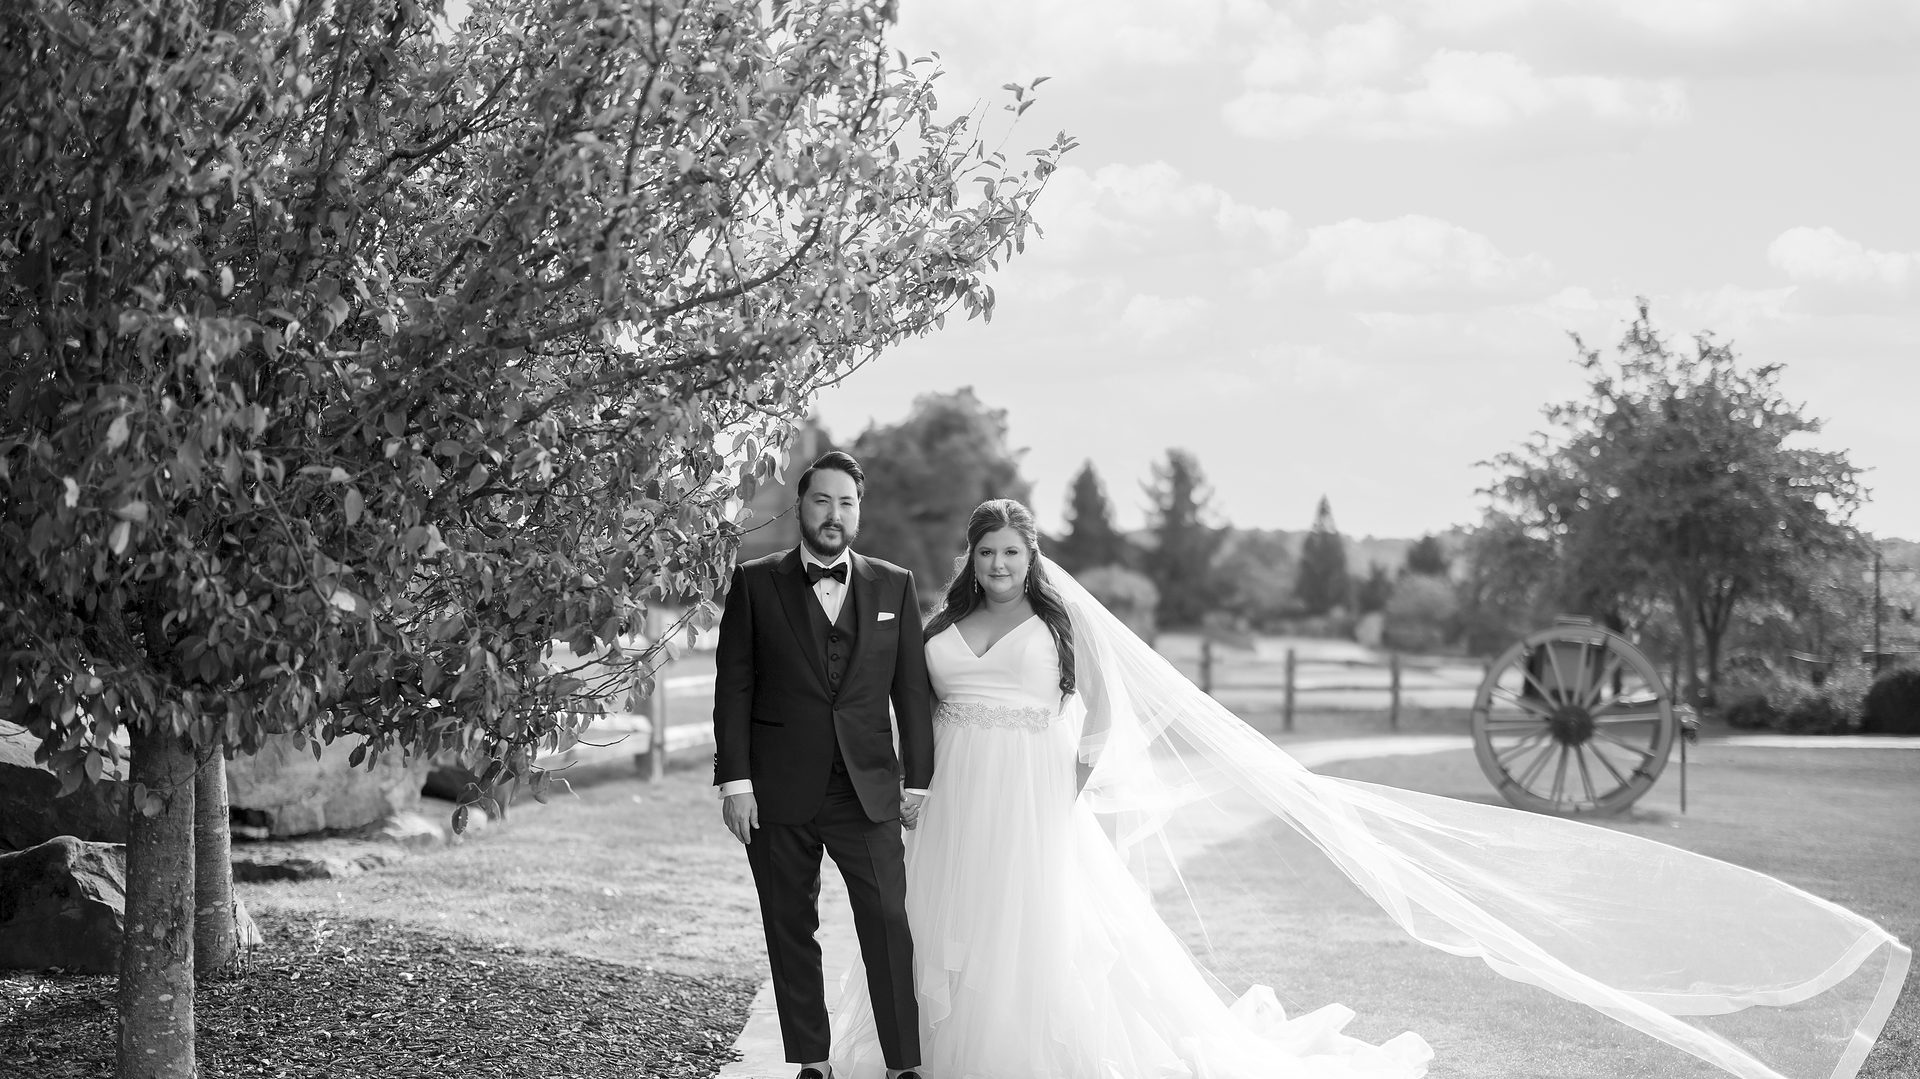 Wedding at Top of the Rock in Branson Missouri with couple in black and white